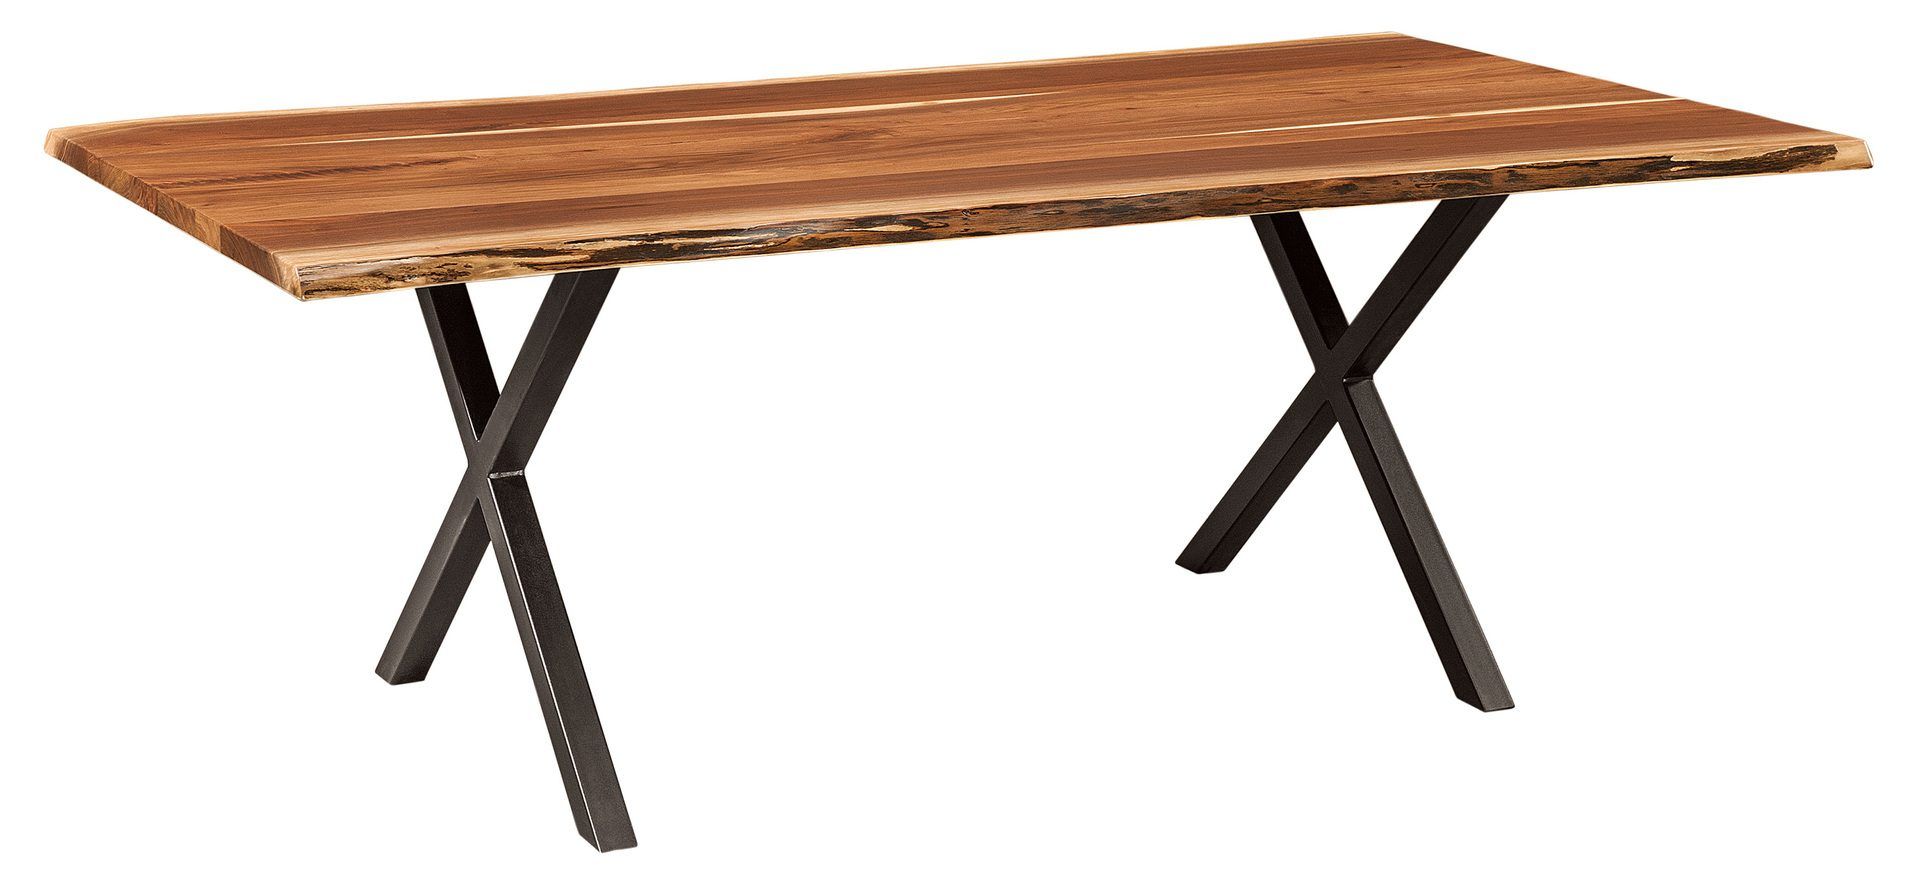 Trestle Tables | Trestle Dining Tables – Brandenberry In Recent Trestle Dining Tables (Photo 1 of 15)